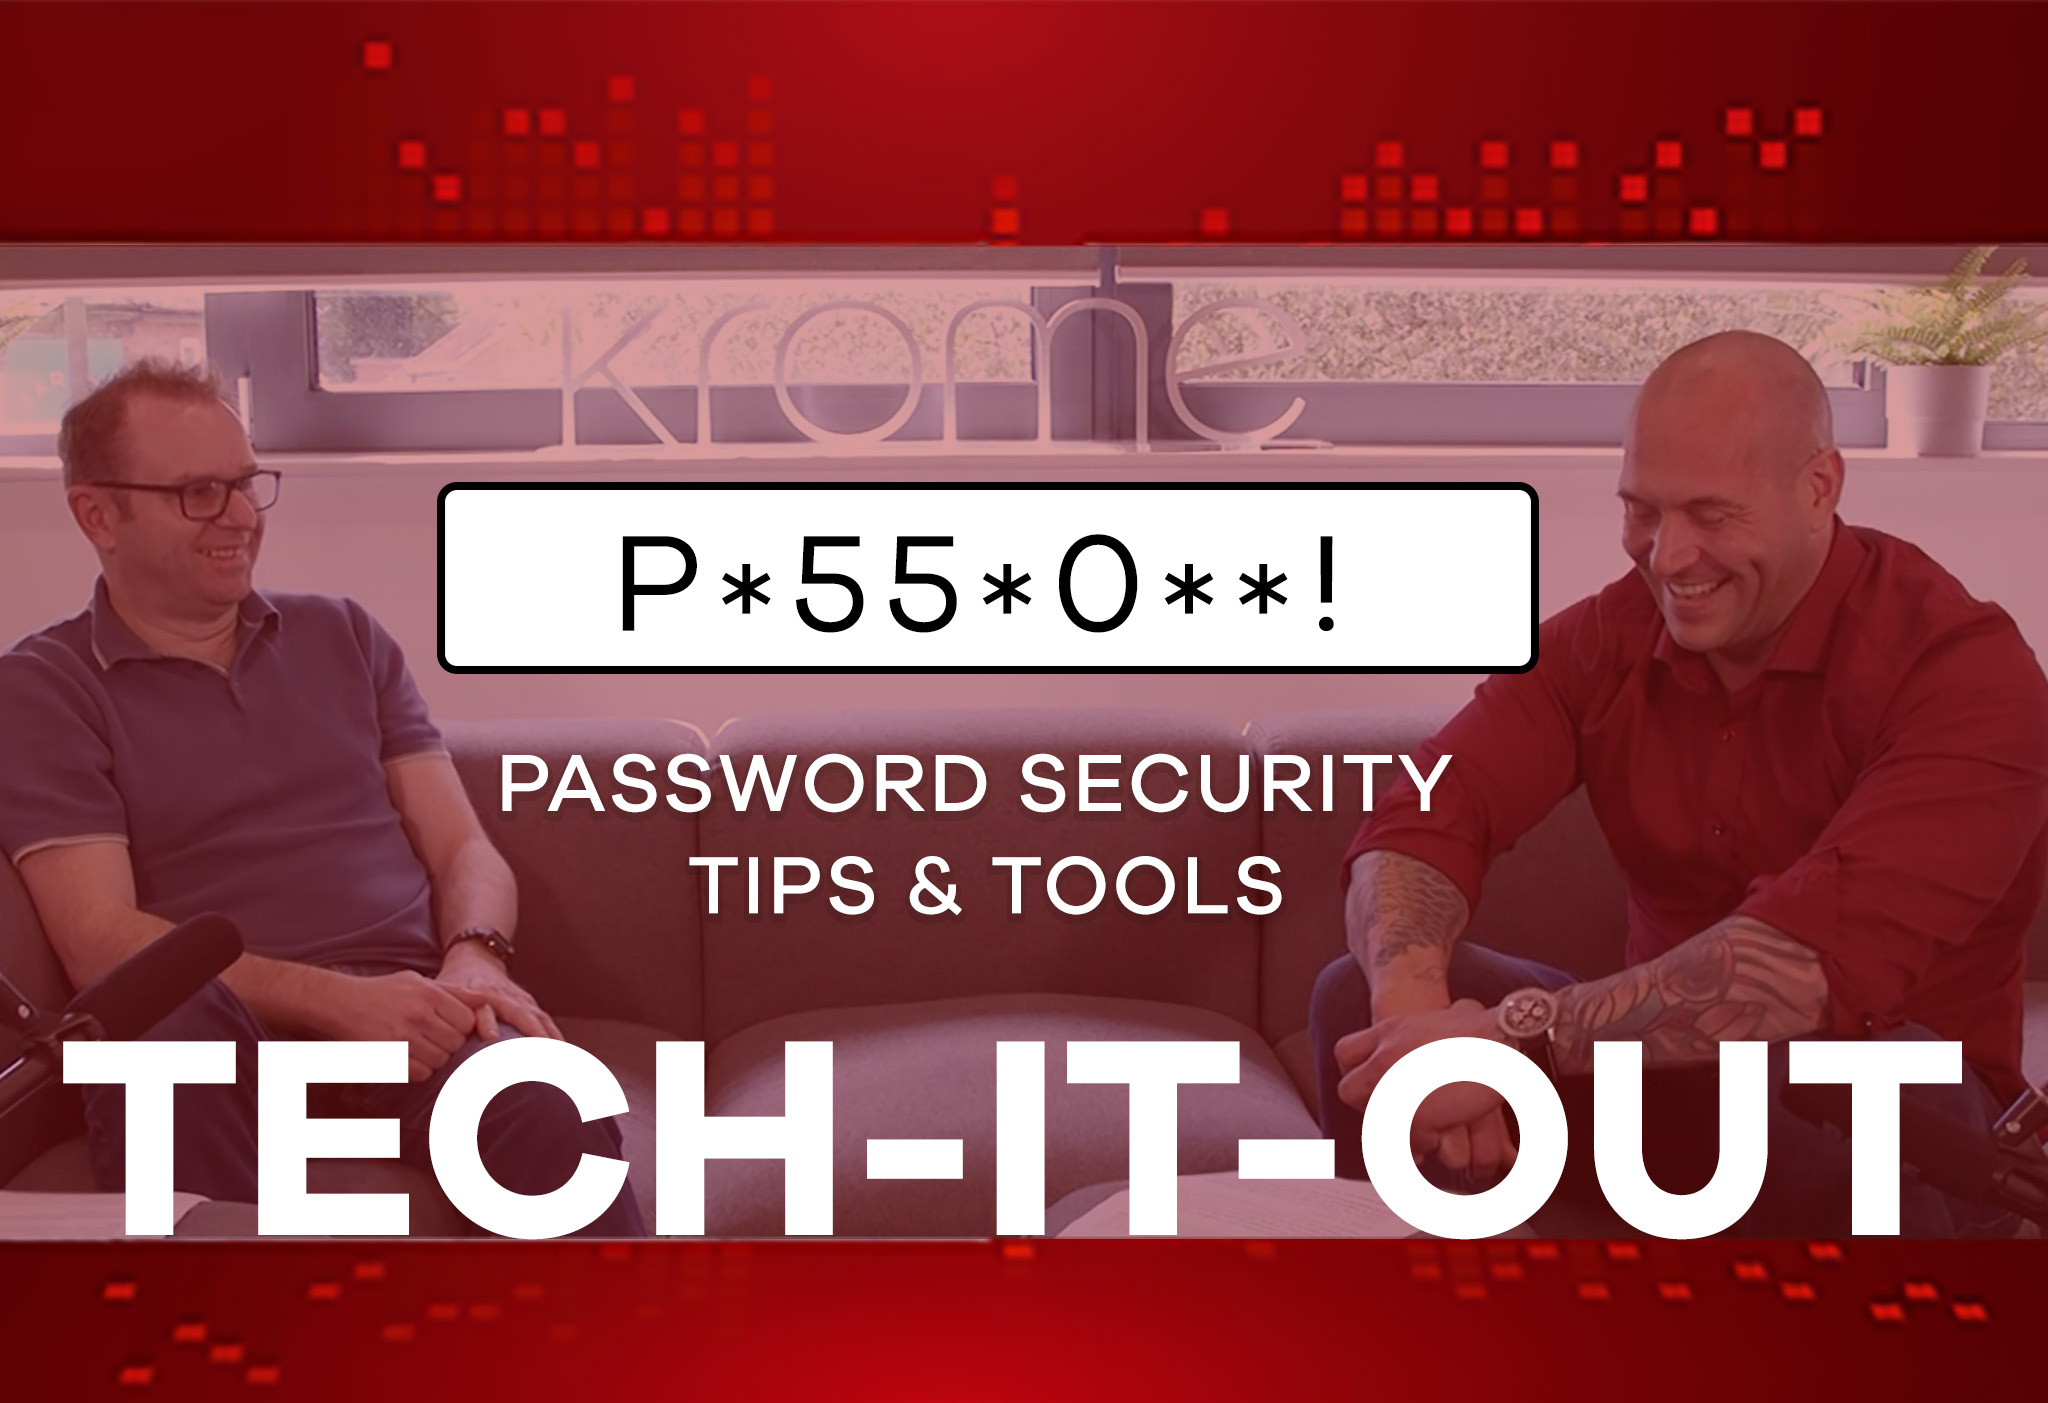 Two men in red attire sitting and discussing, with text overlay "password security tips & tools" and "tech-it-out" on a red background.